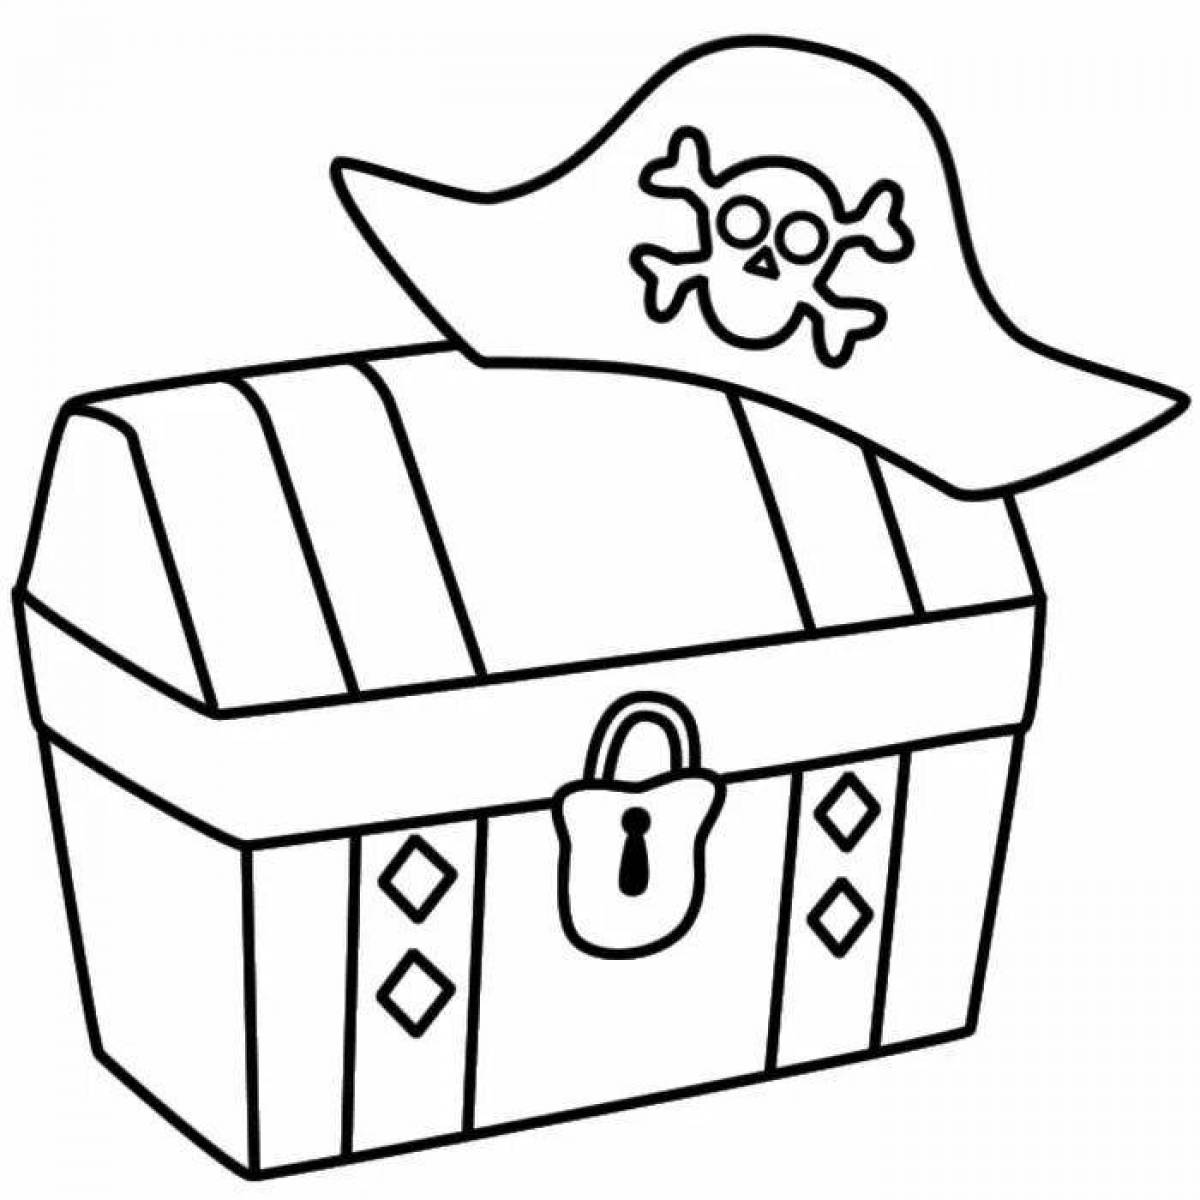 Shining chest coloring page